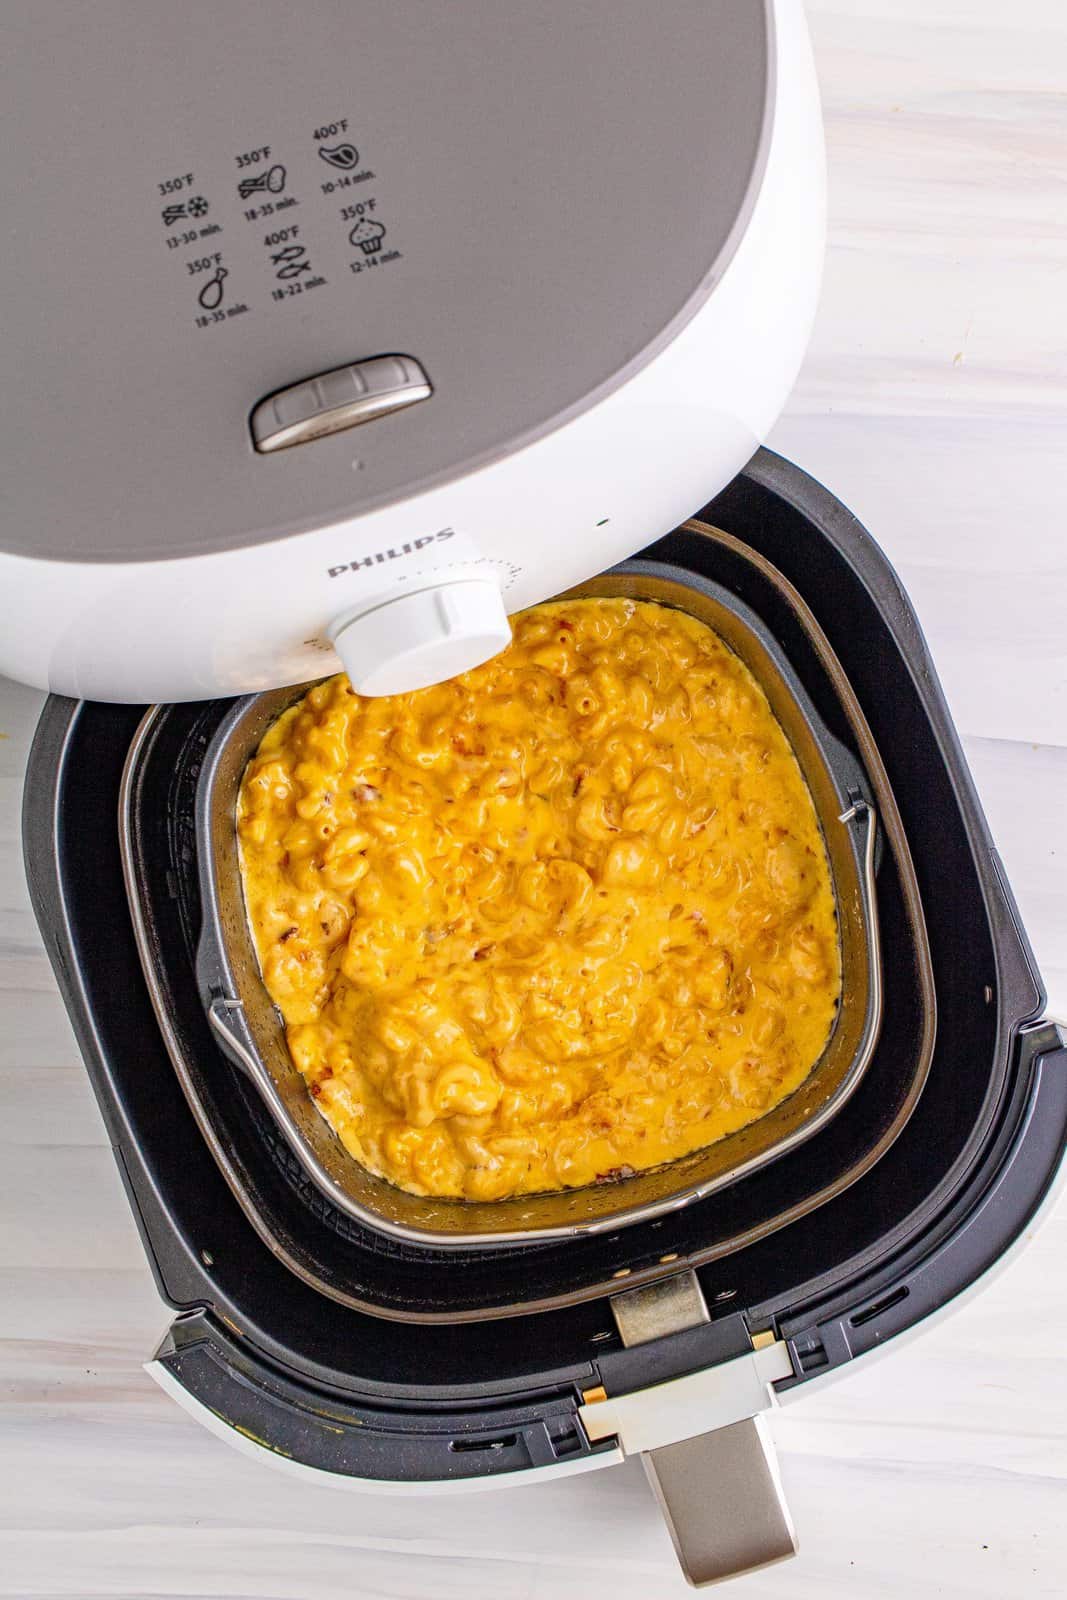 Stirred Mac and cheese mixture in air fryer.